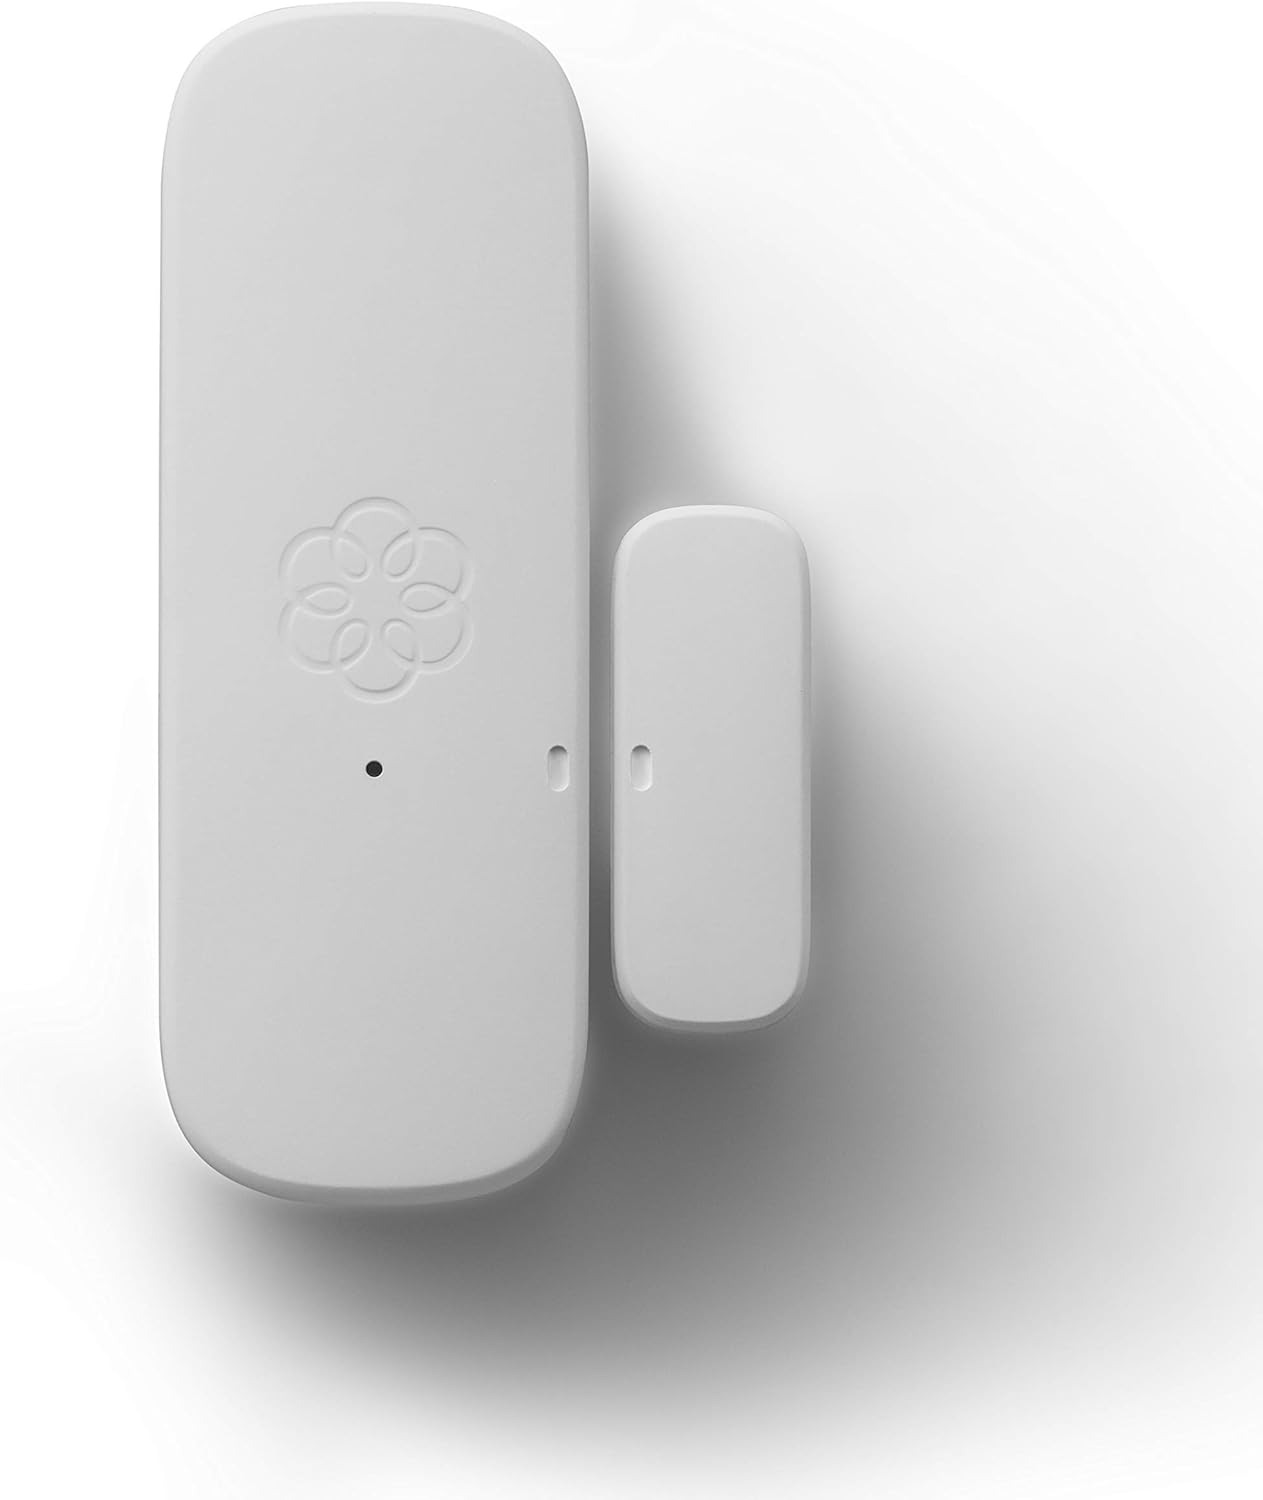 Generic Ooma Door and Window Sensor, works with Ooma Smart Home Security. No contracts and free self-monitor plan. Optional professiona